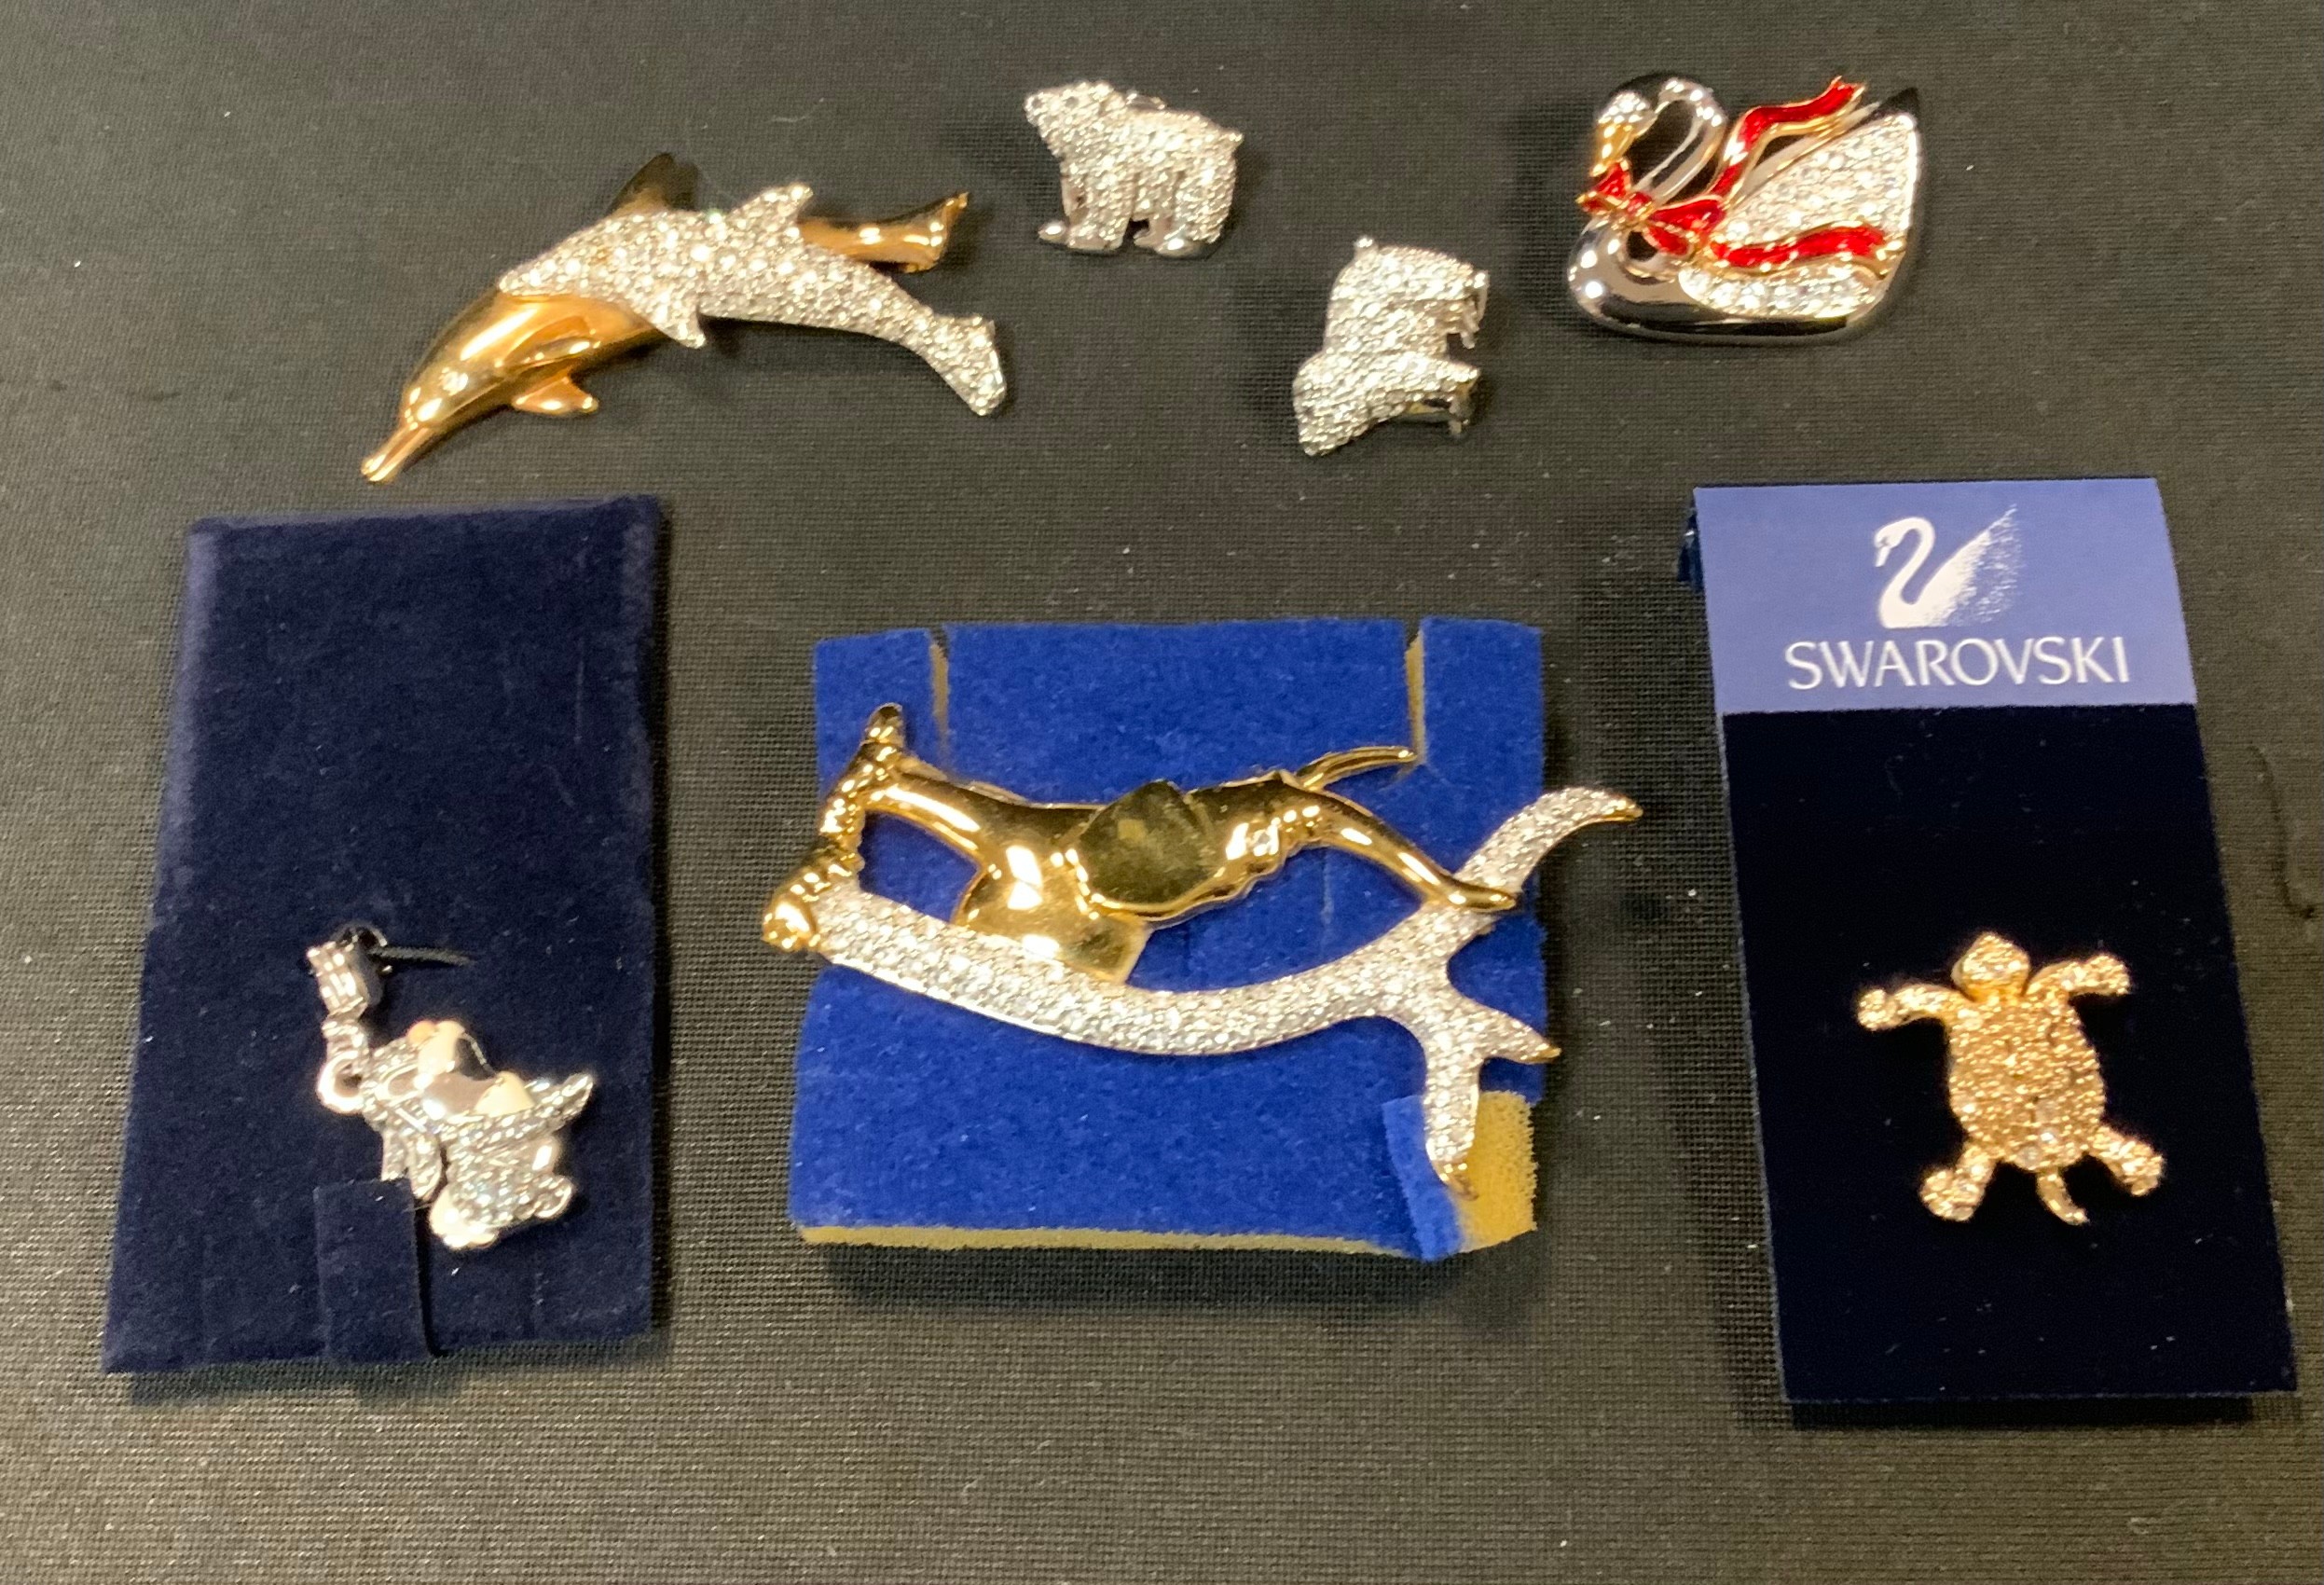 Swarovski Crystal Jewellery - Elephant and tree branch brooch; others, Leaping Dolphin, Swan,